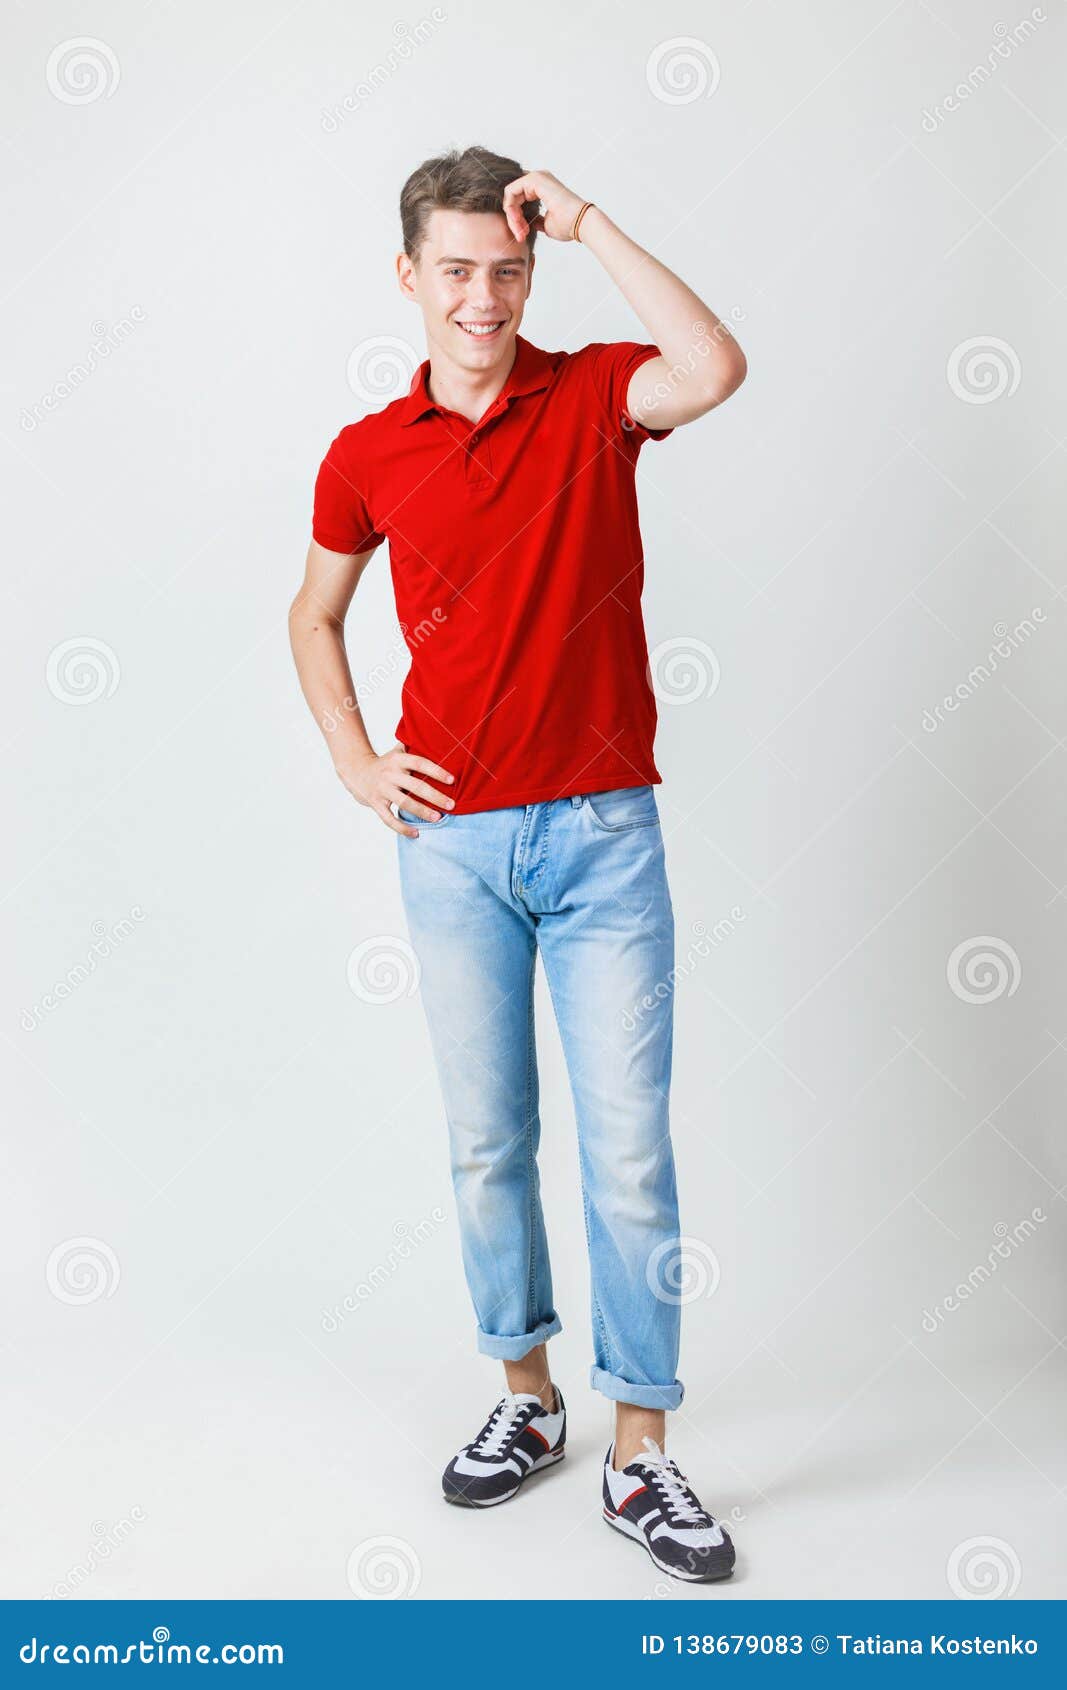 Full Length Photo of Friendly Looking Cheerful European Guy Wearing Red ...